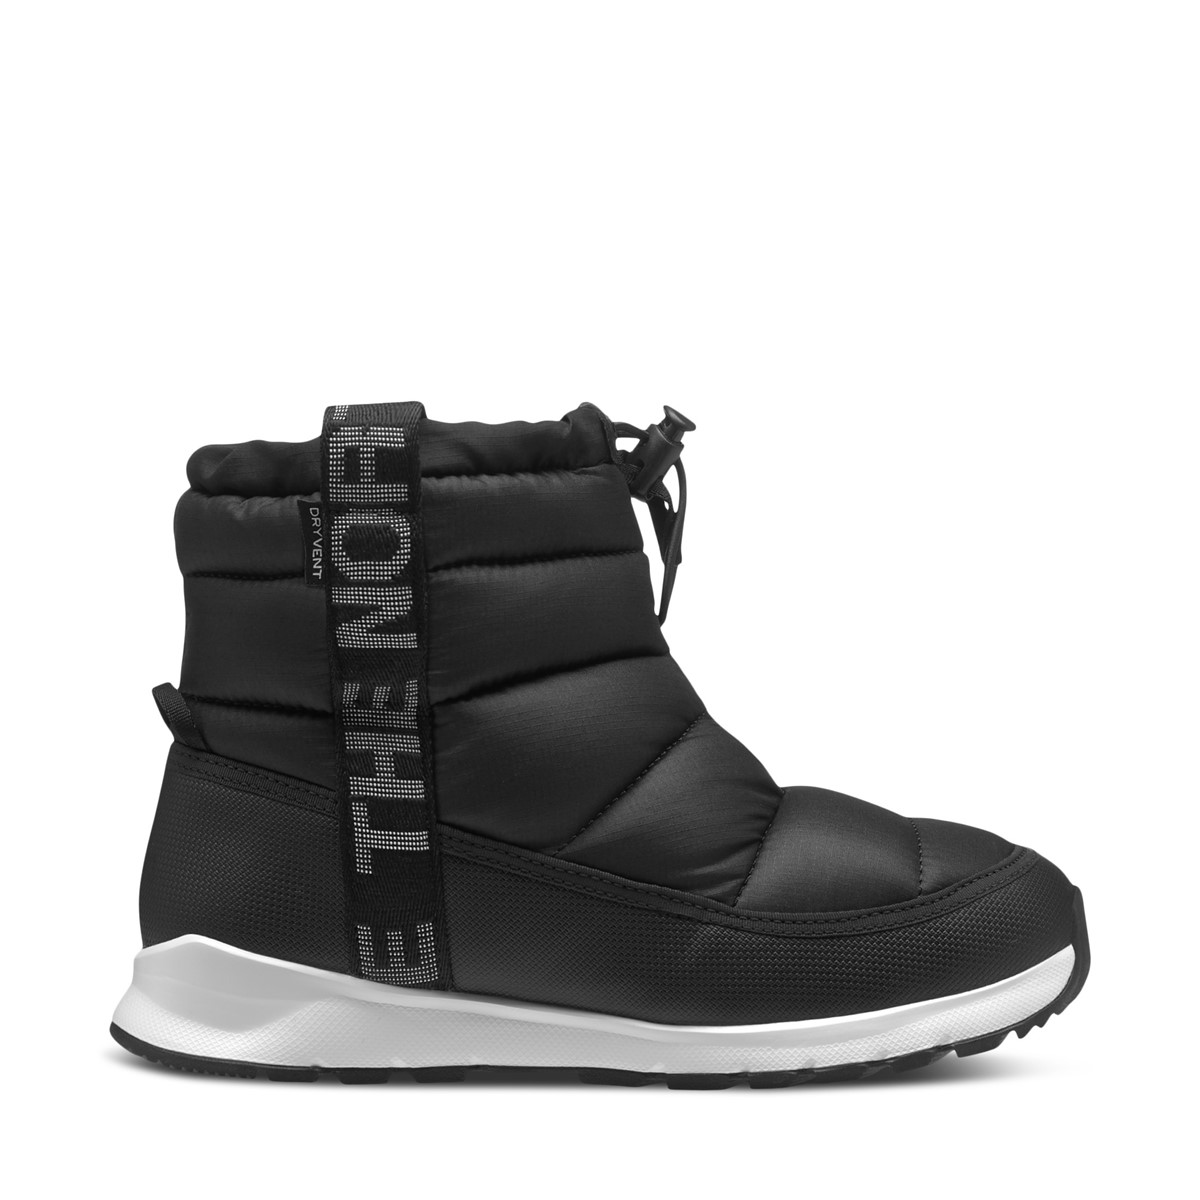 Big Kids' Thermoball Winter Boots in Black